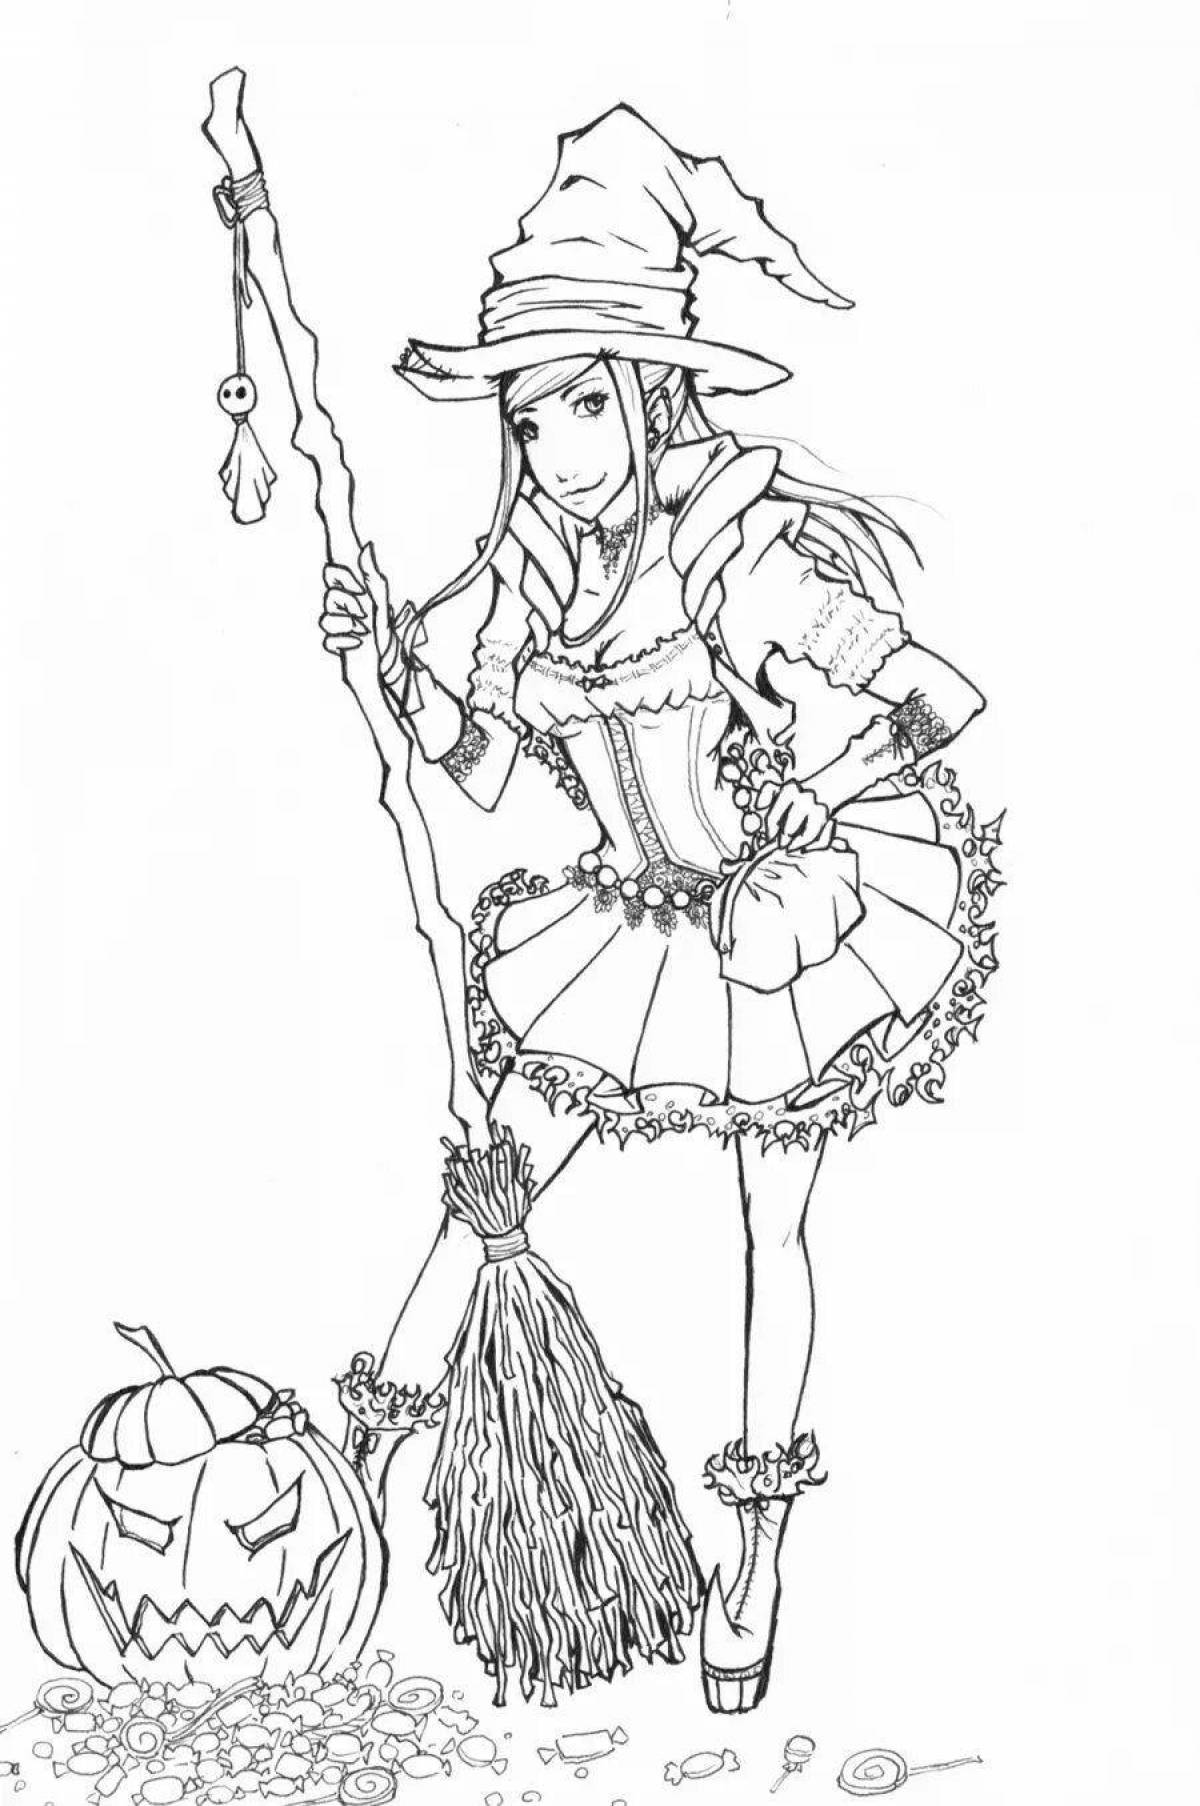 Magic aya and witch coloring book